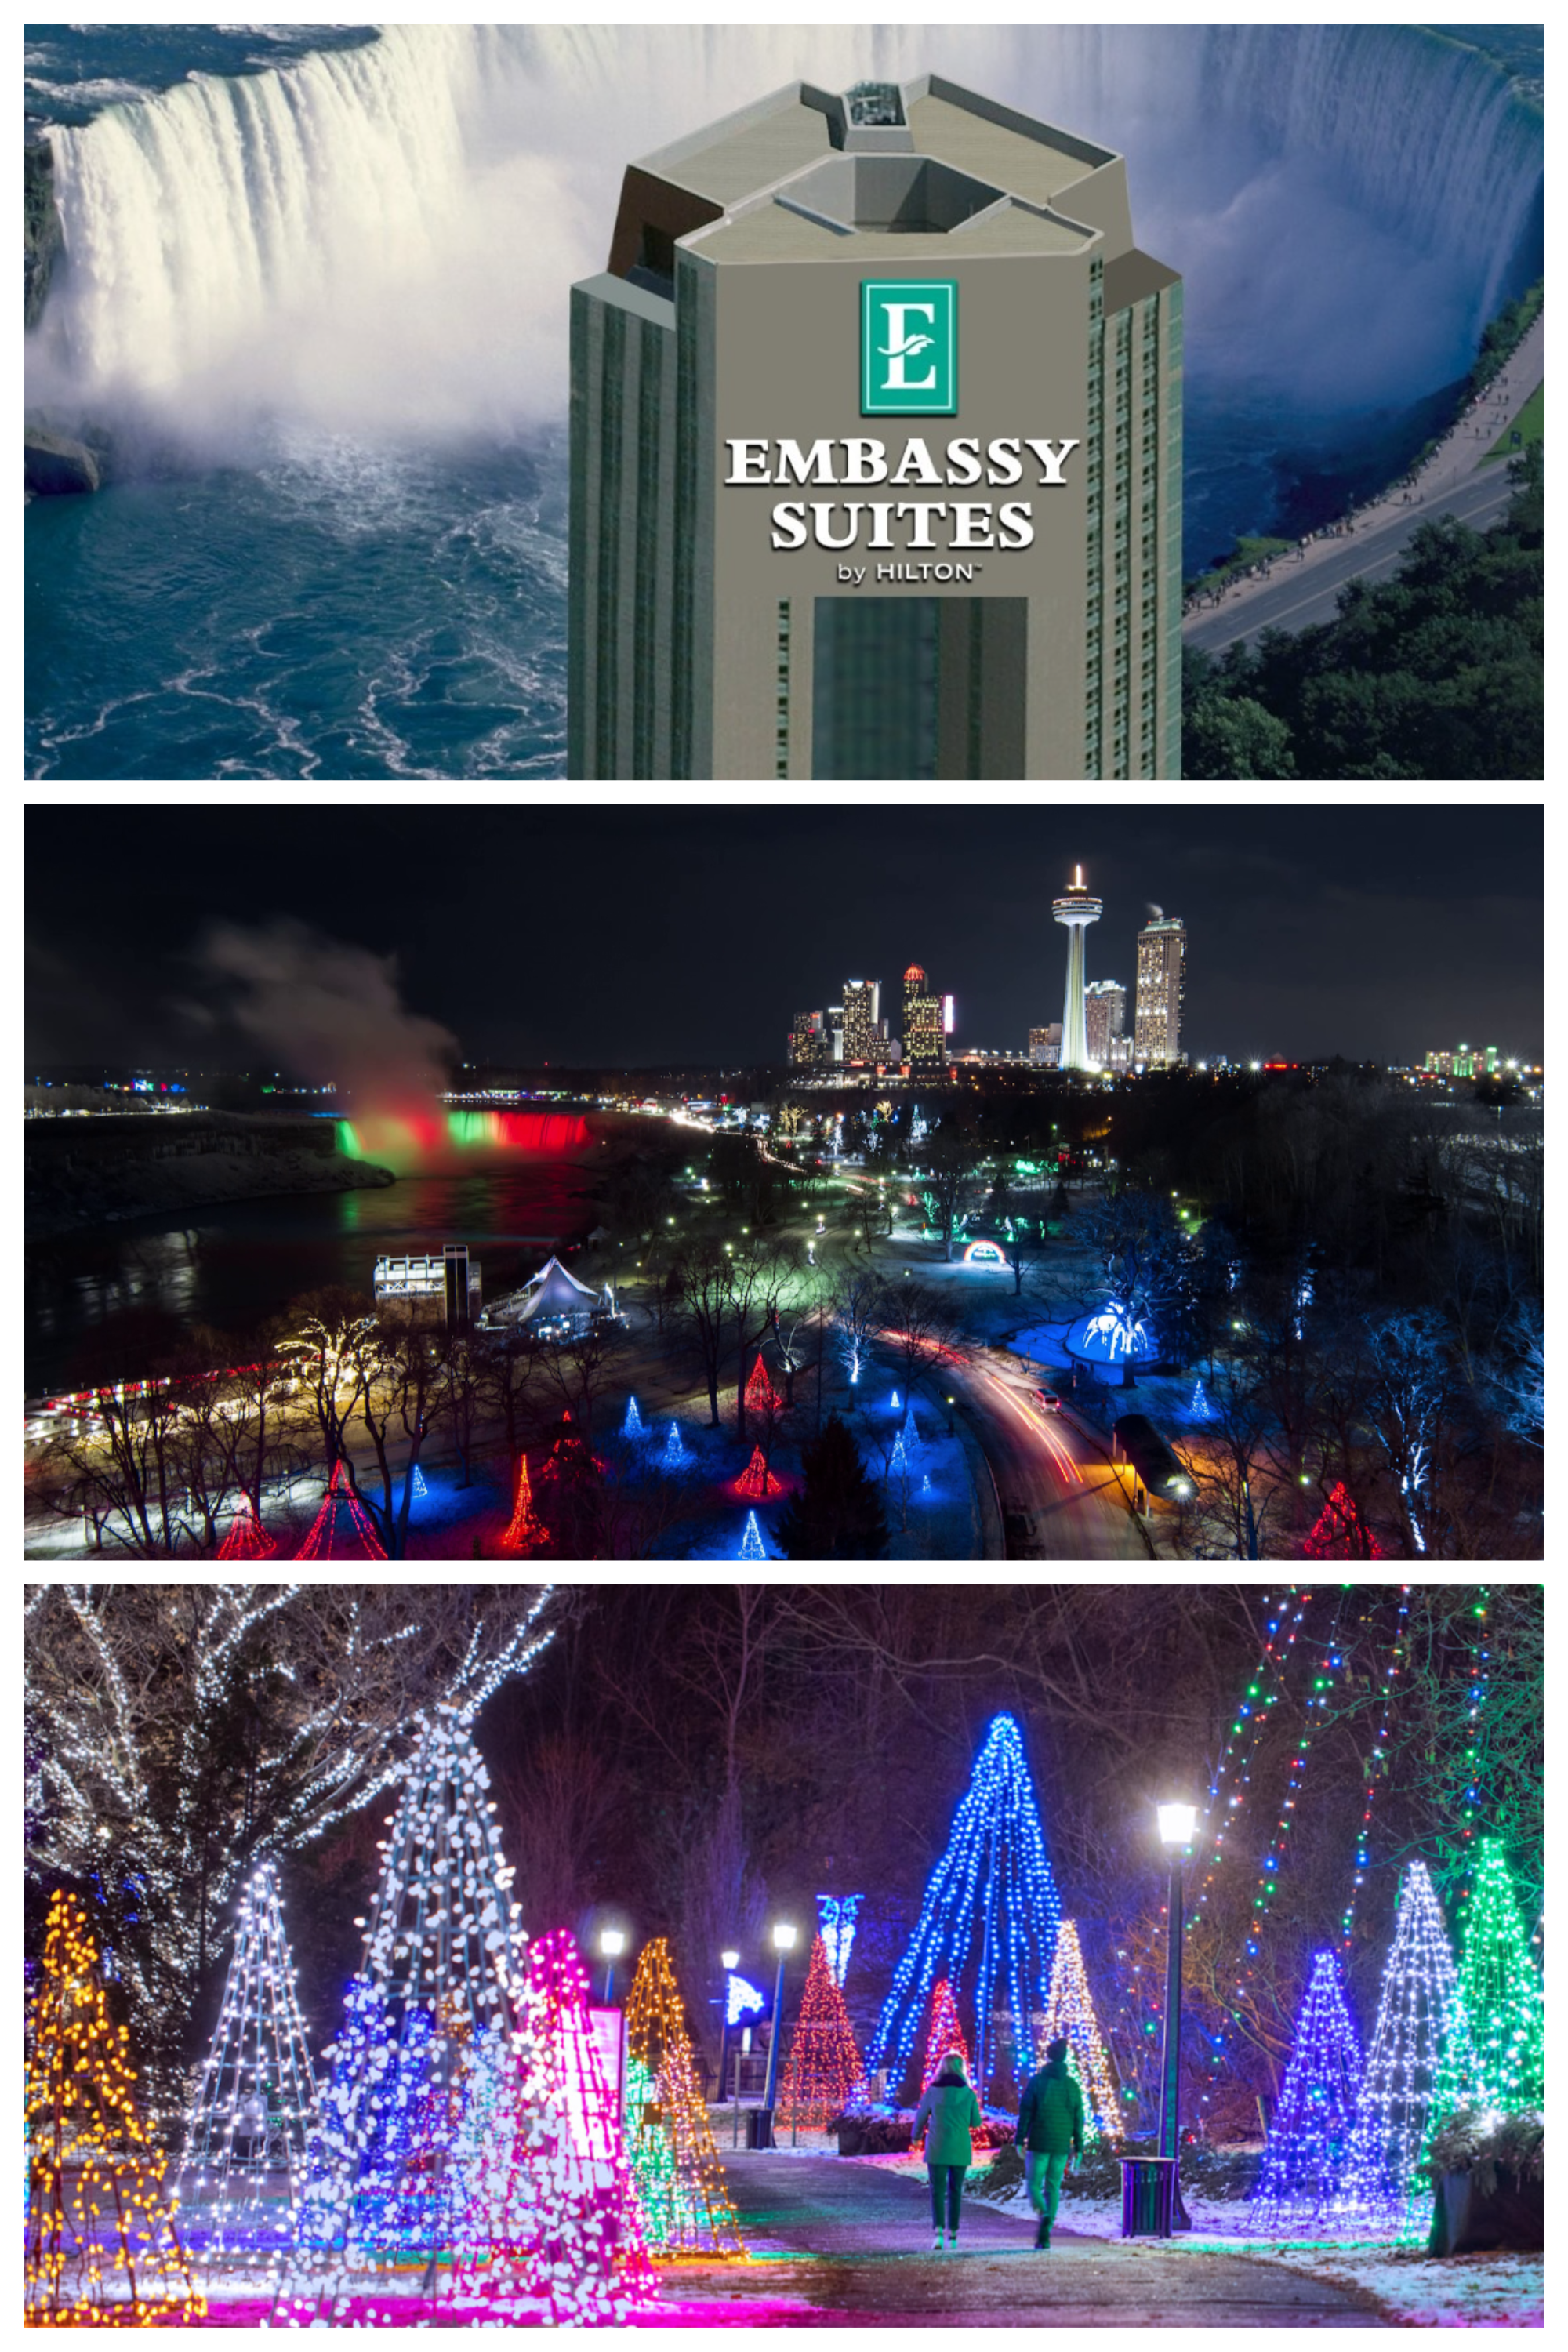 Niagara Falls Winter Festival Of Lights: Embassy Suites Hotel Offers A Special Package With A Special View